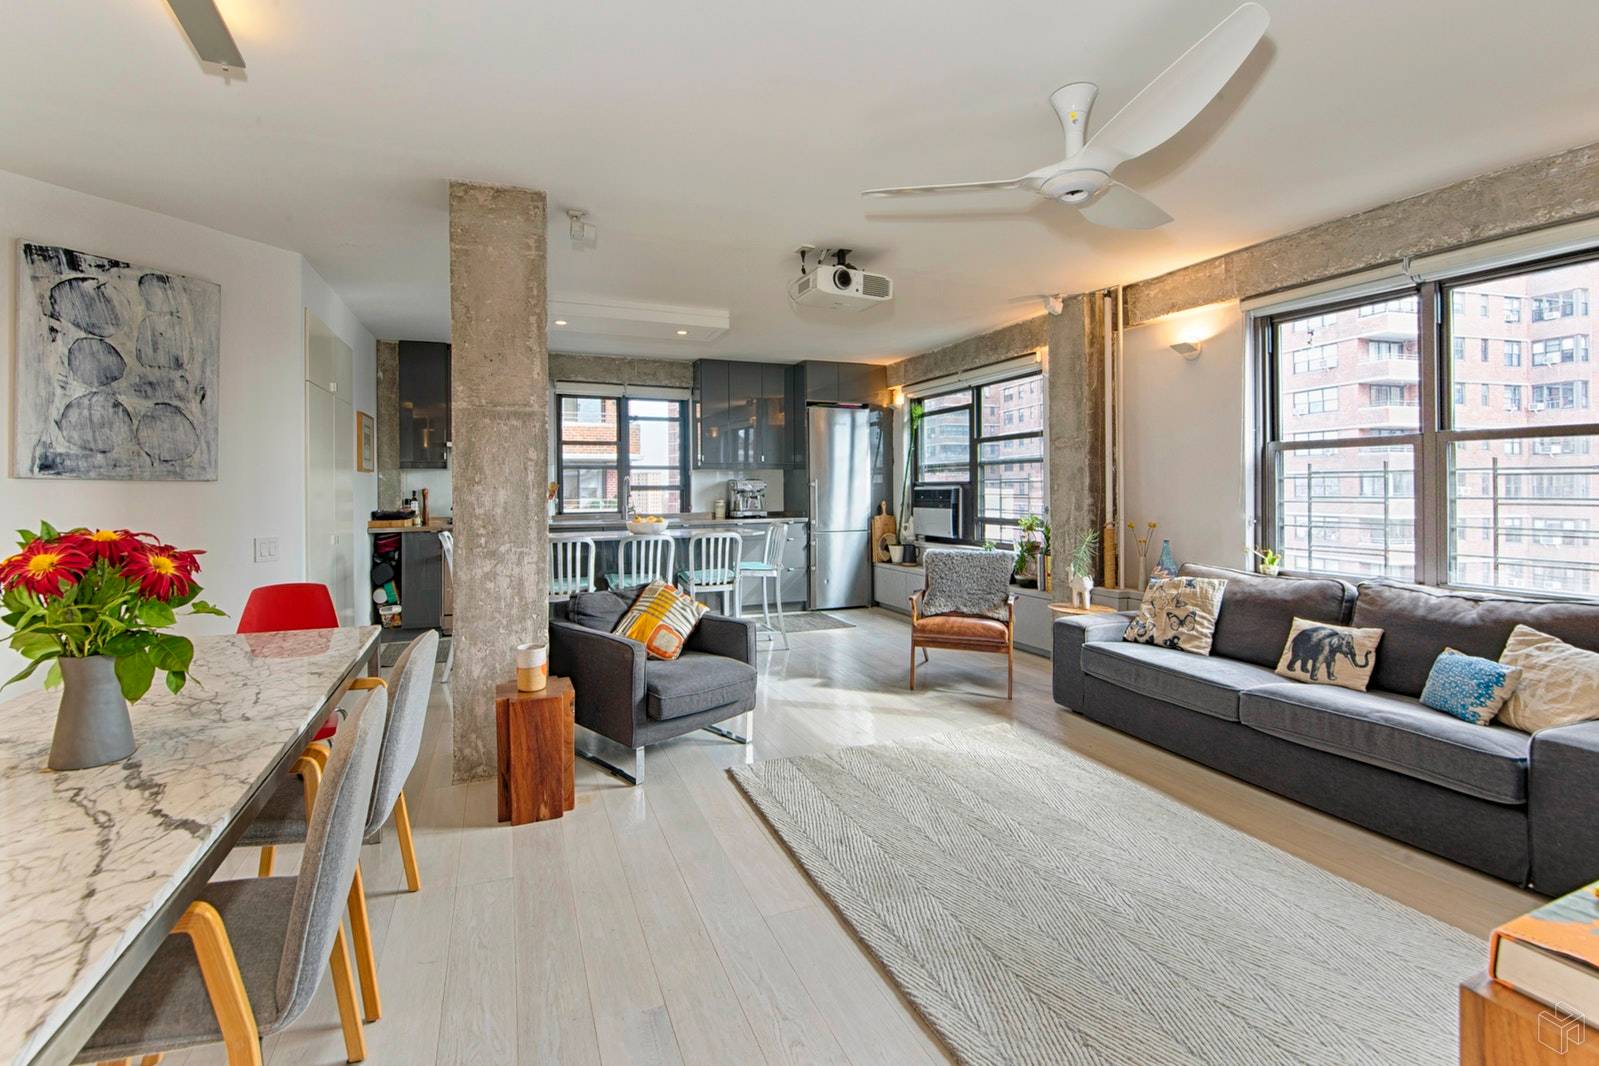 Yes you can have a fully redesigned 4BR 2BA combination home on Manhattan's Lower East Side with a brand new Trader Joe's right across the street and only a 1.